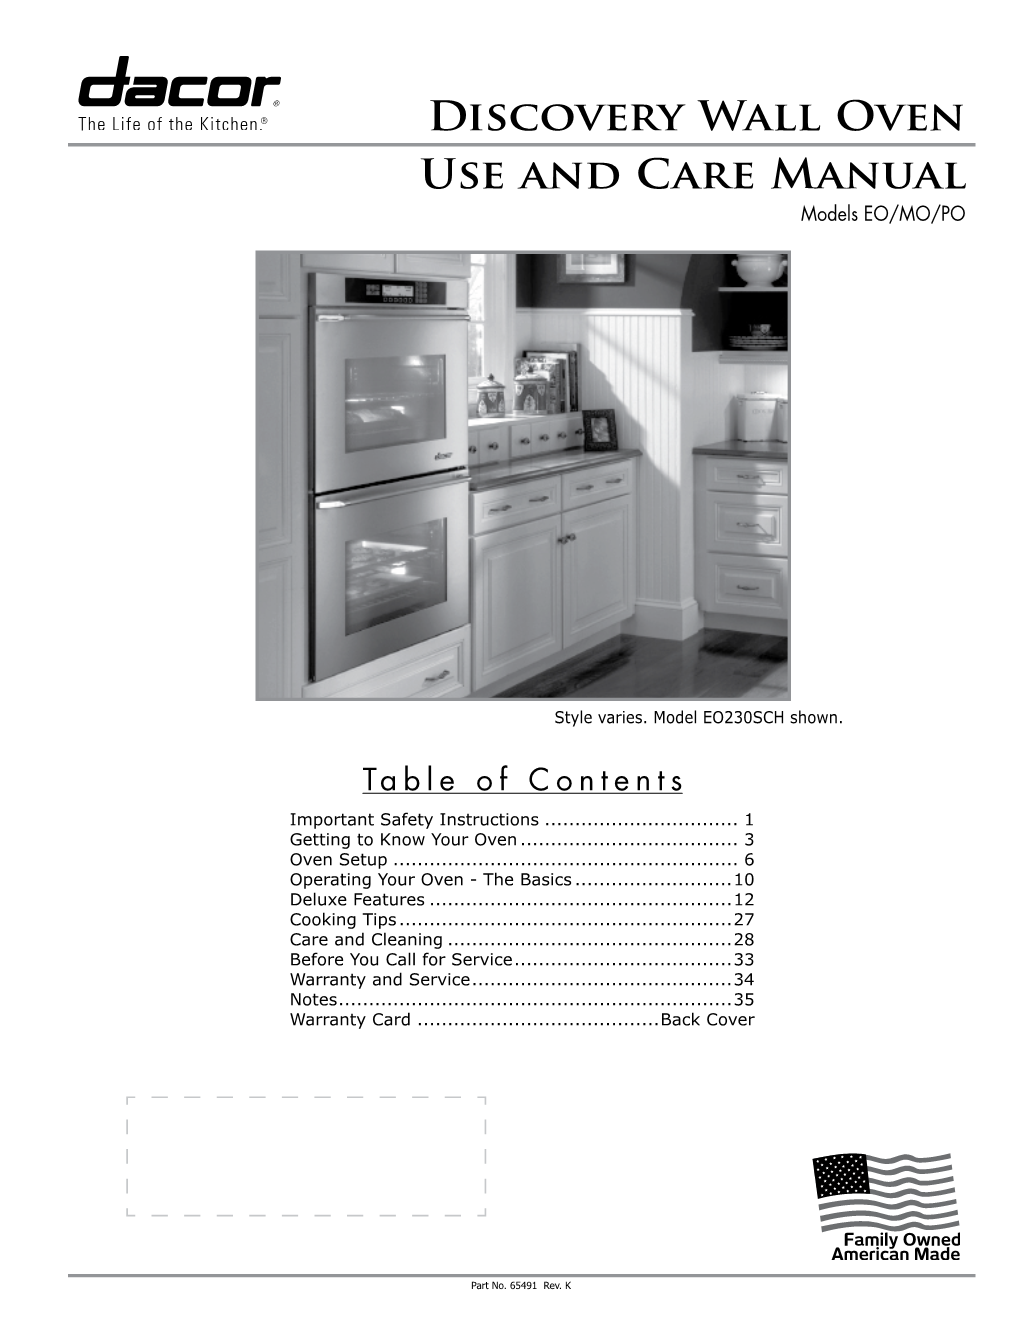 Use and Care Manual Discovery Wall Oven